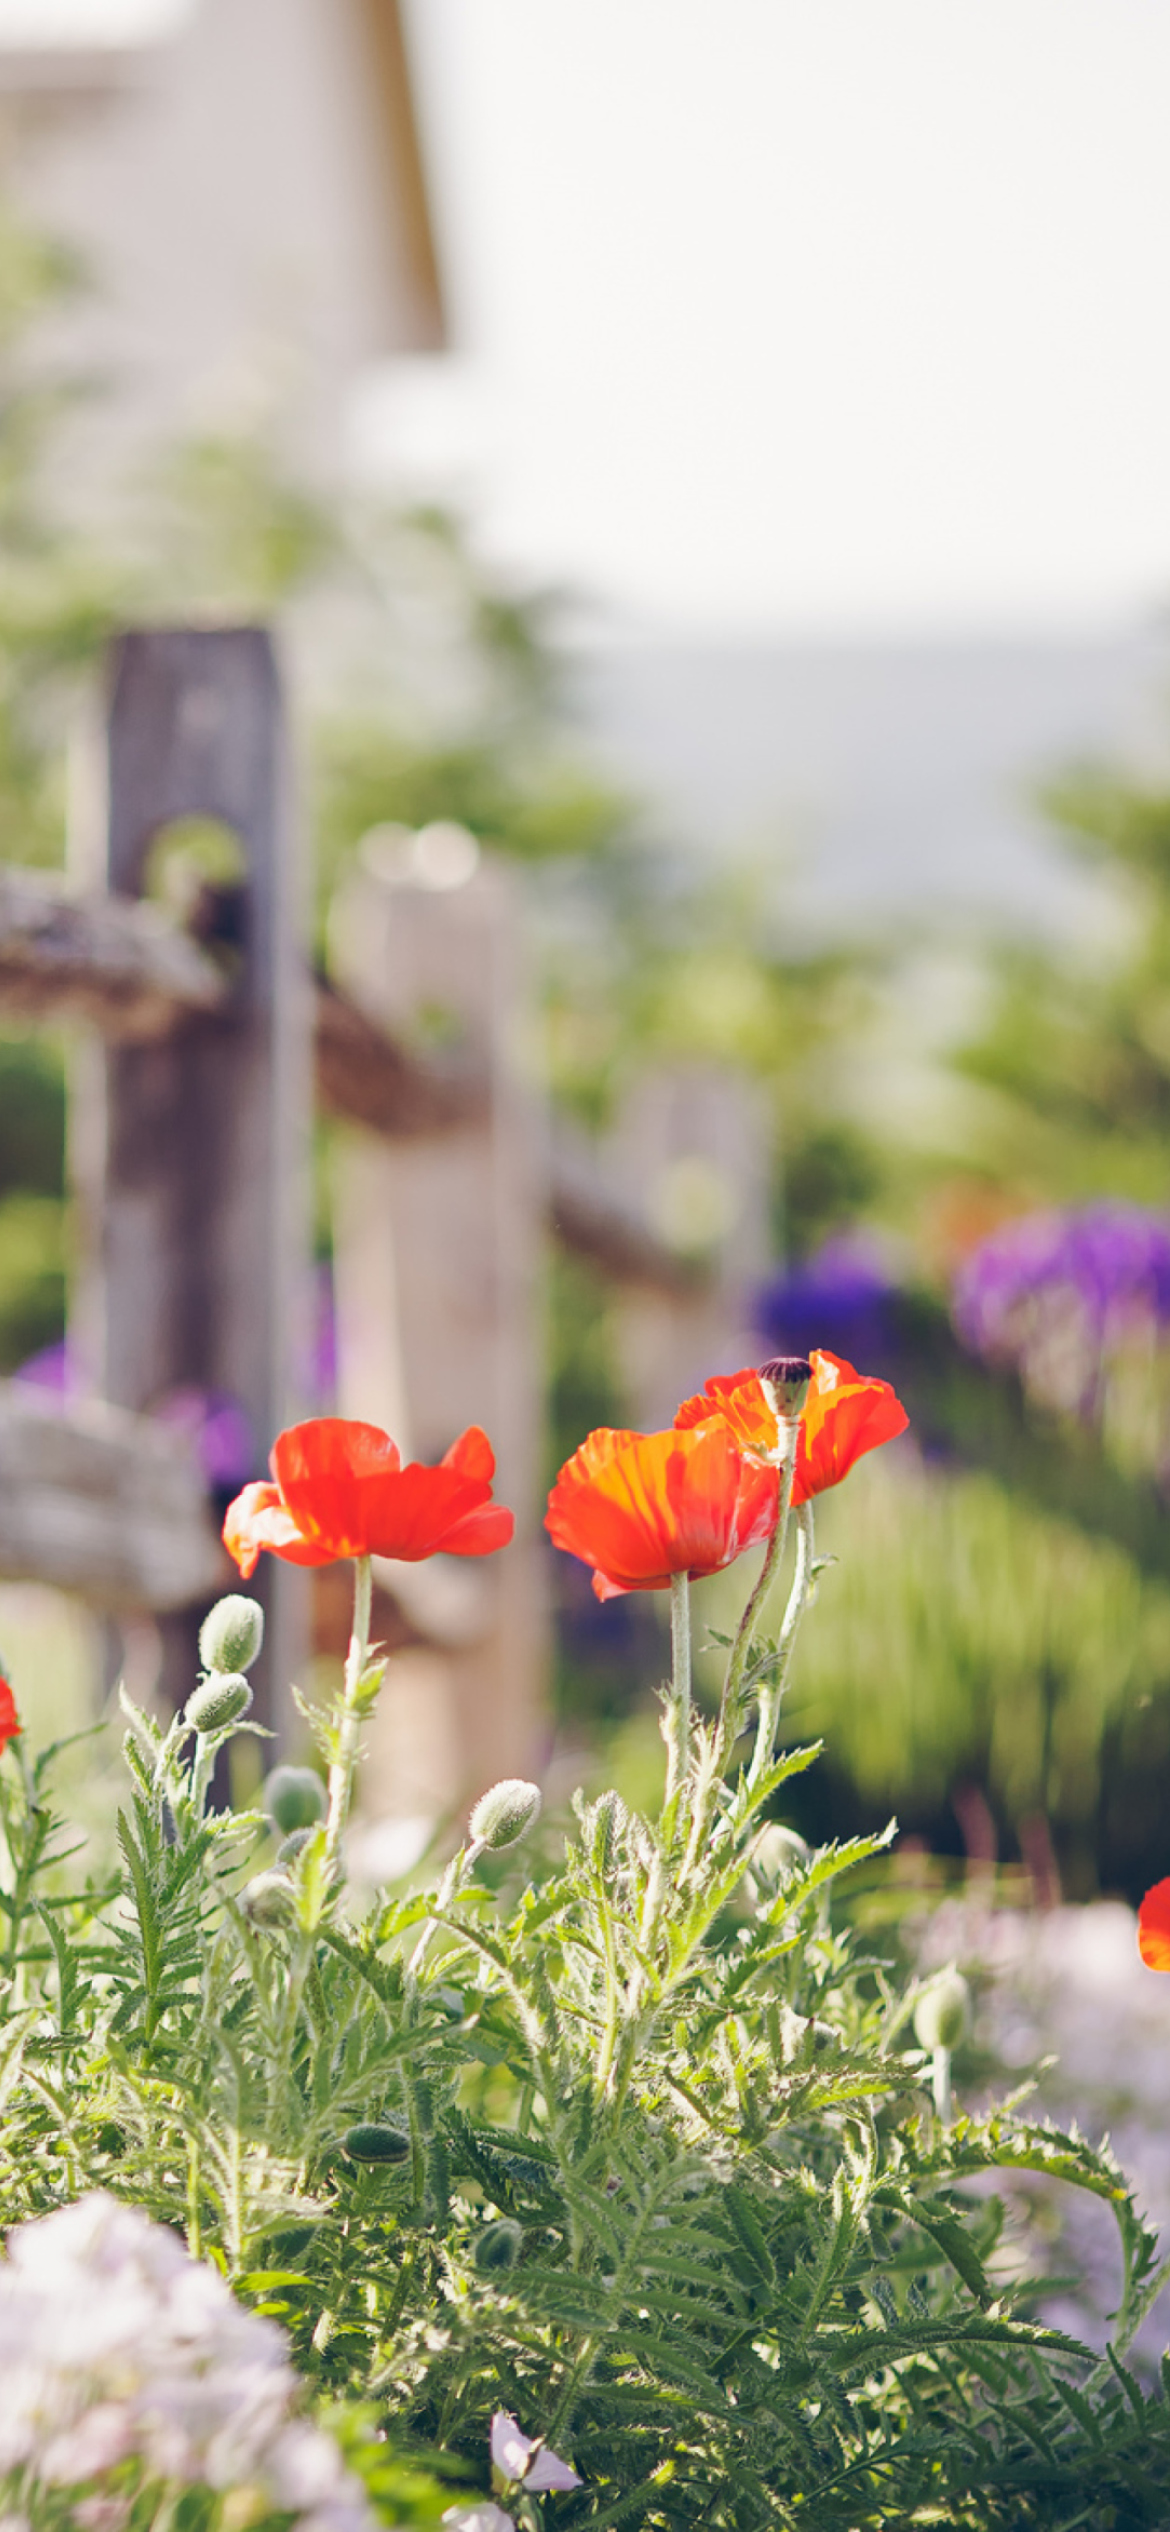 Обои Poppy Flowers And Old Fence 1170x2532